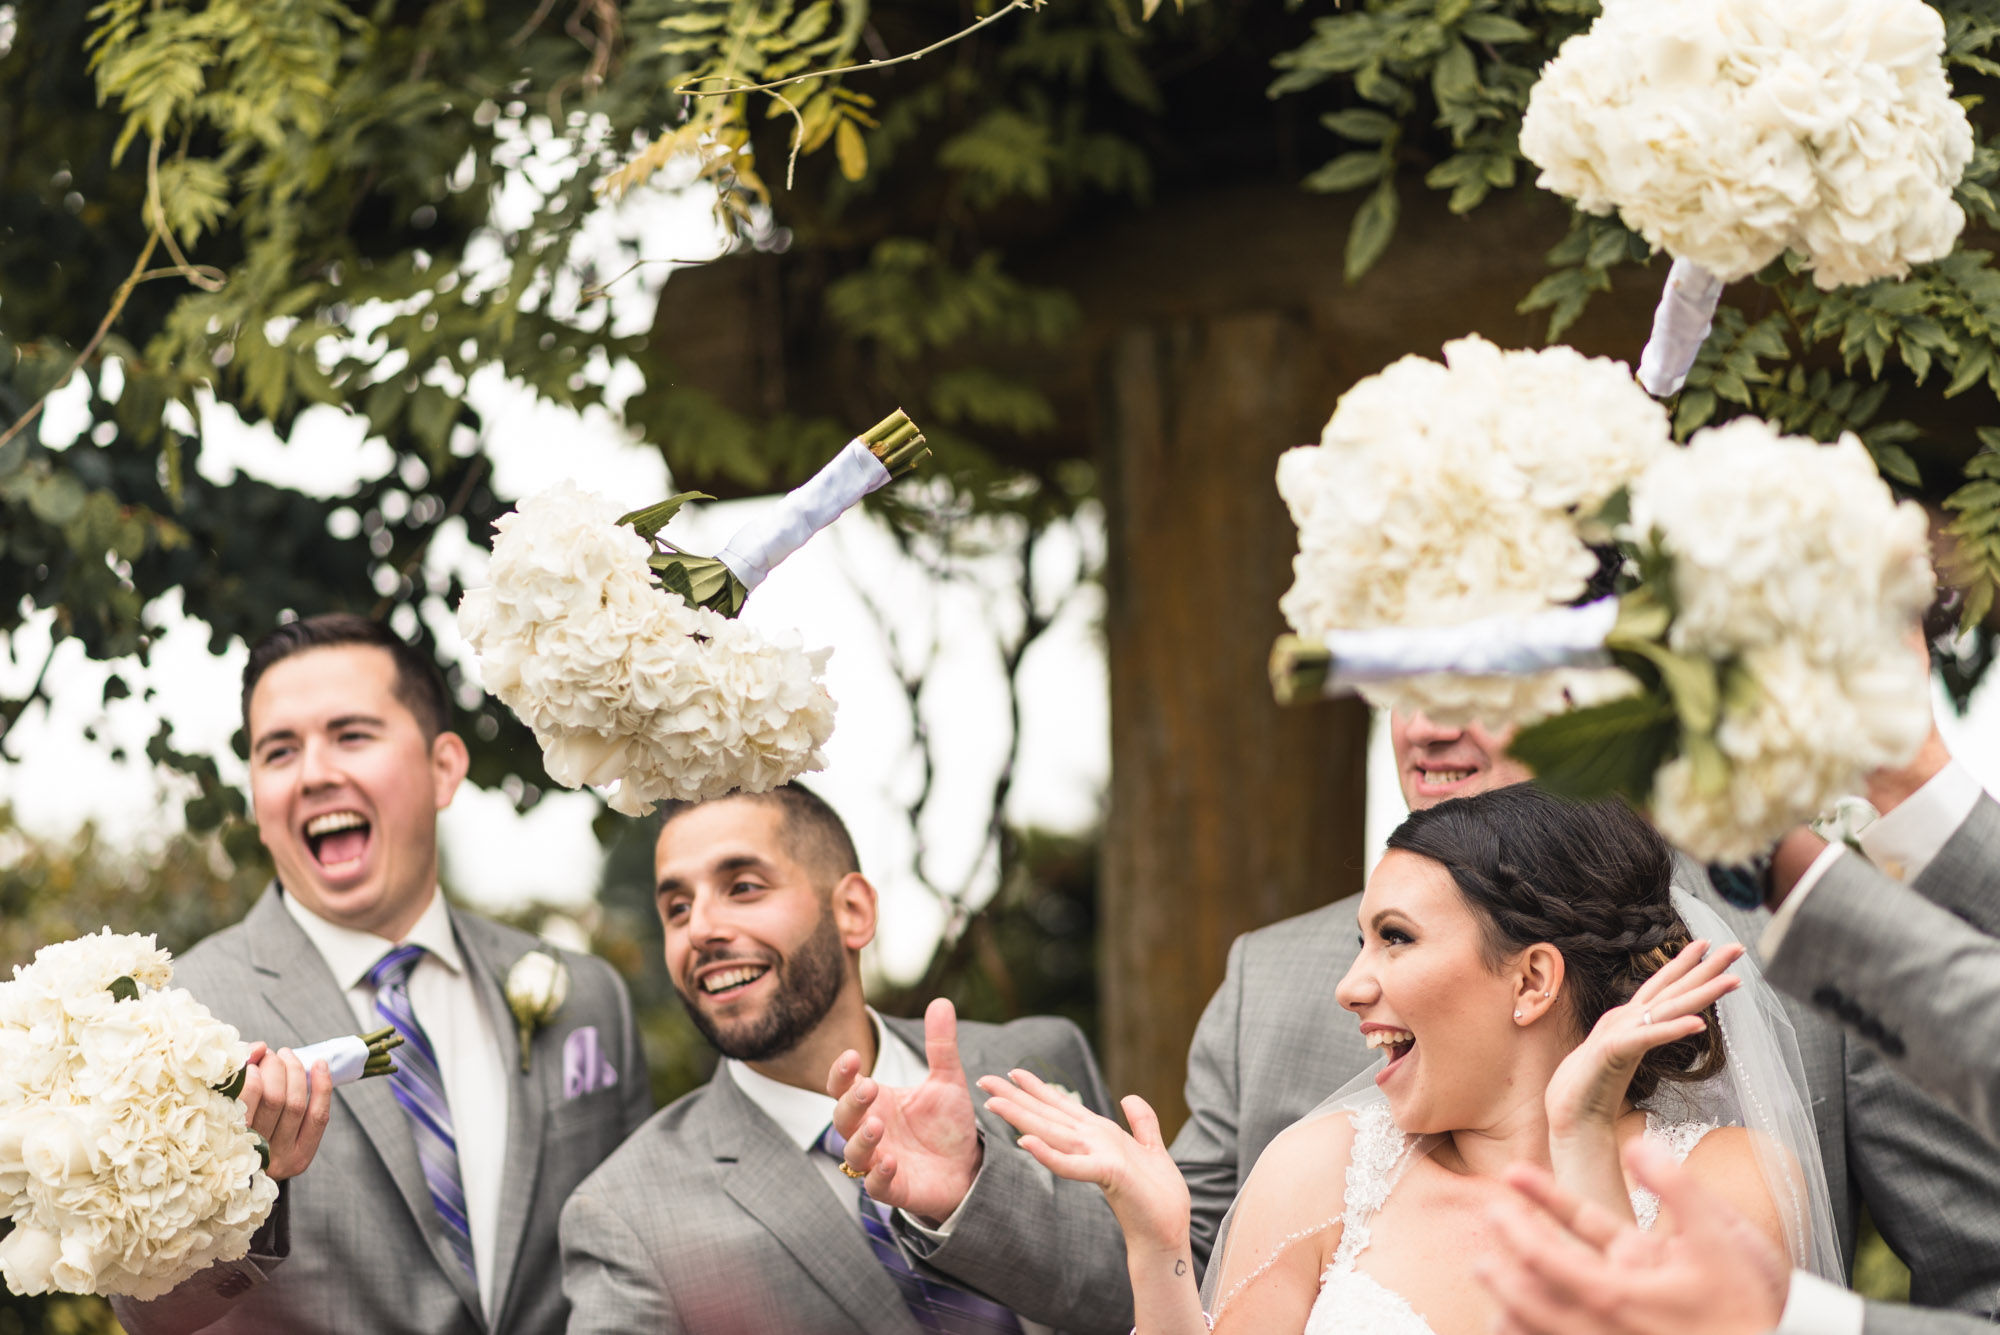 Groomsmen and Bride tossing bouquets